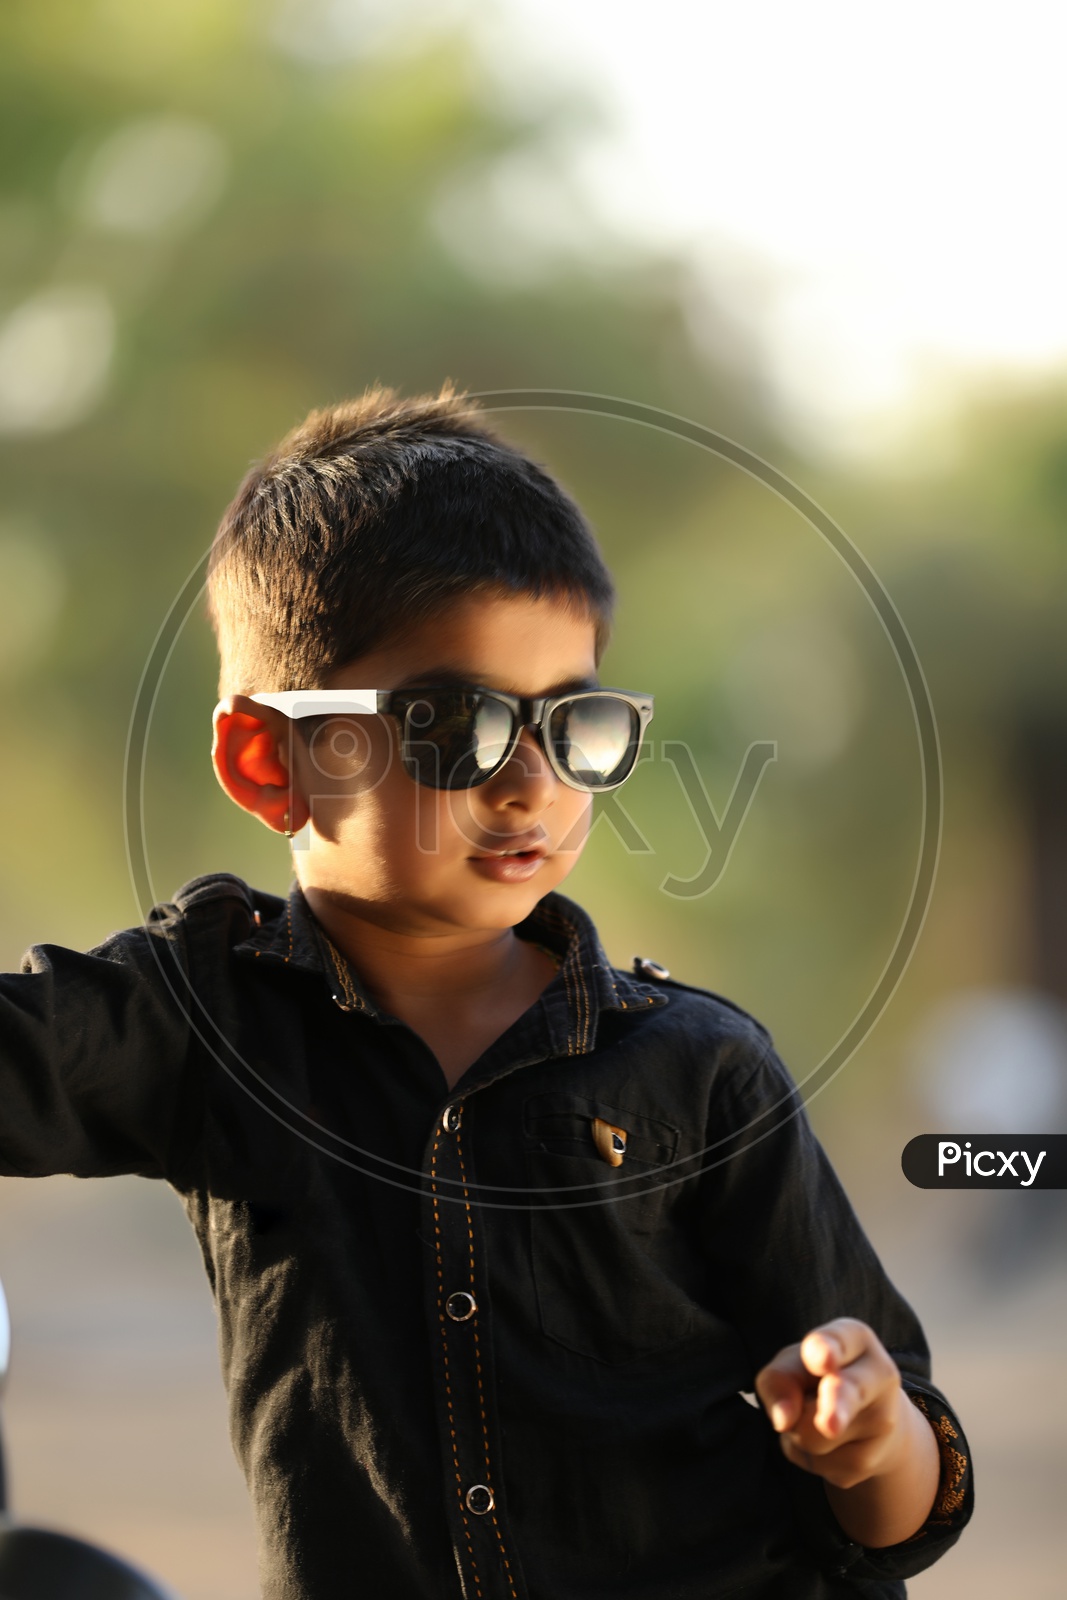 Young Indian Boy  kid Or Child Posing on outdoor Background